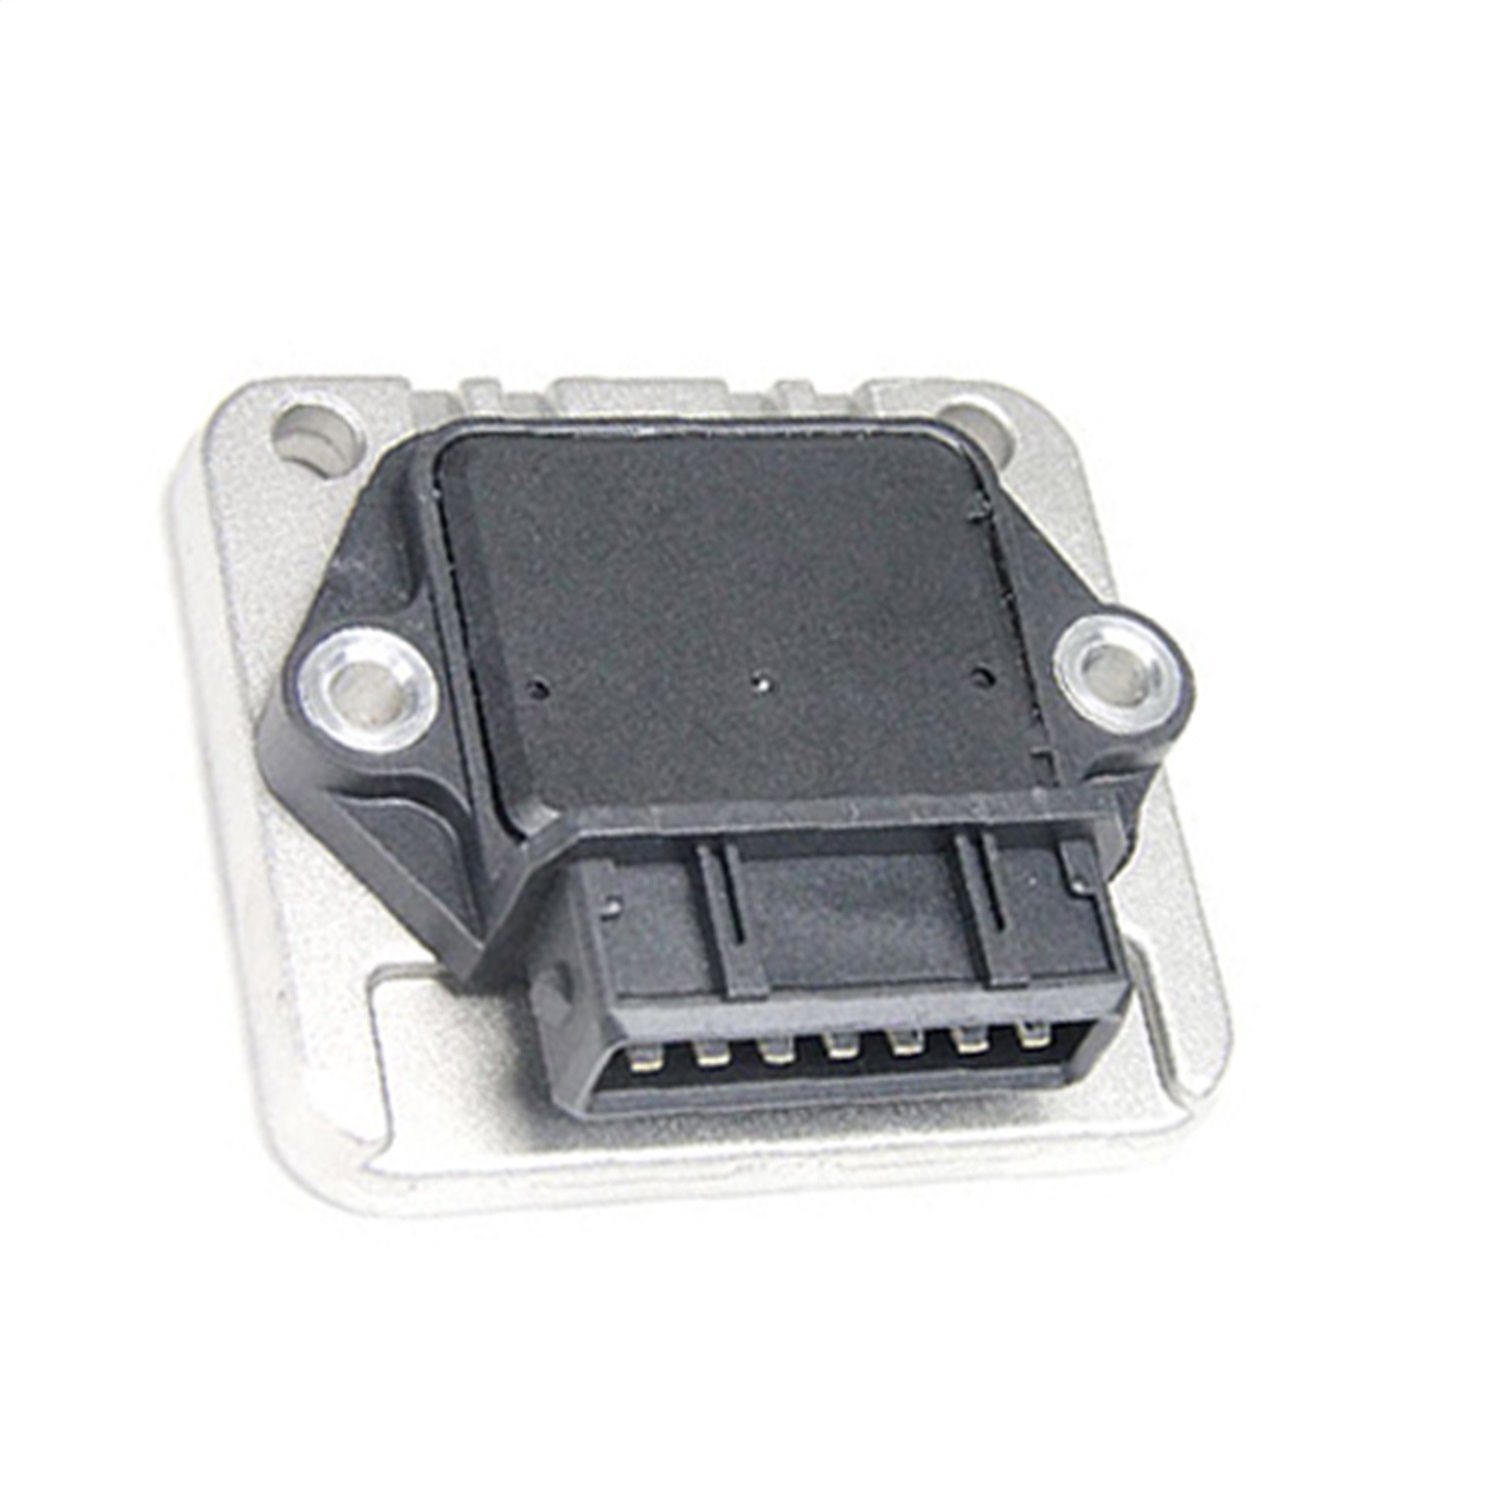 OE Replacement Ignition Control Module for Audi, Volkswagen,